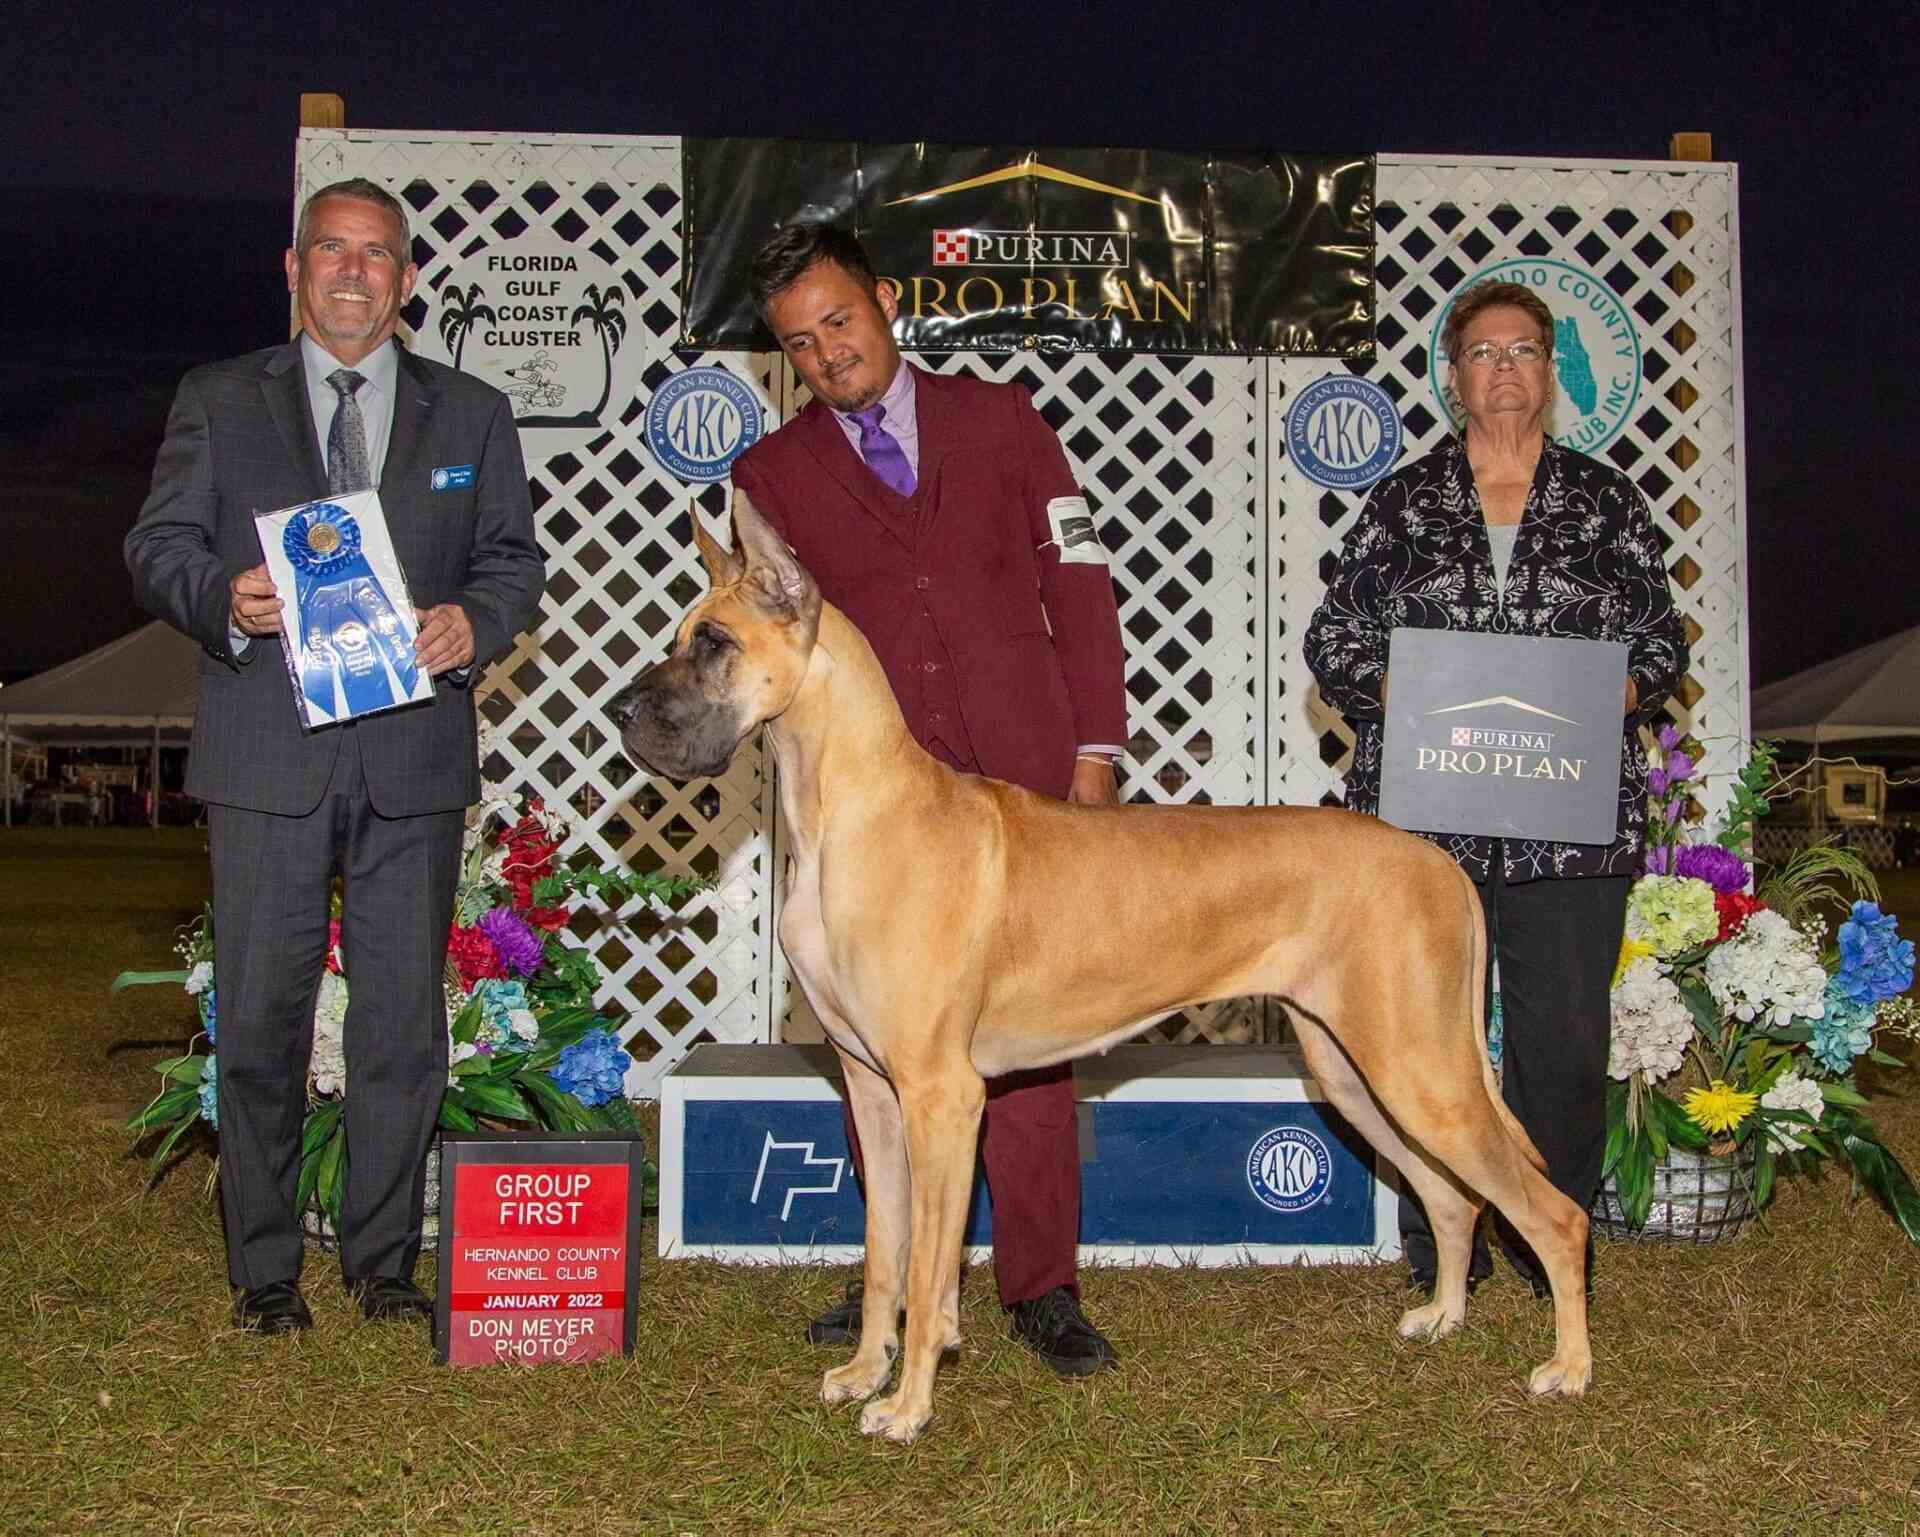 A dog show event with a beautiful tall dog